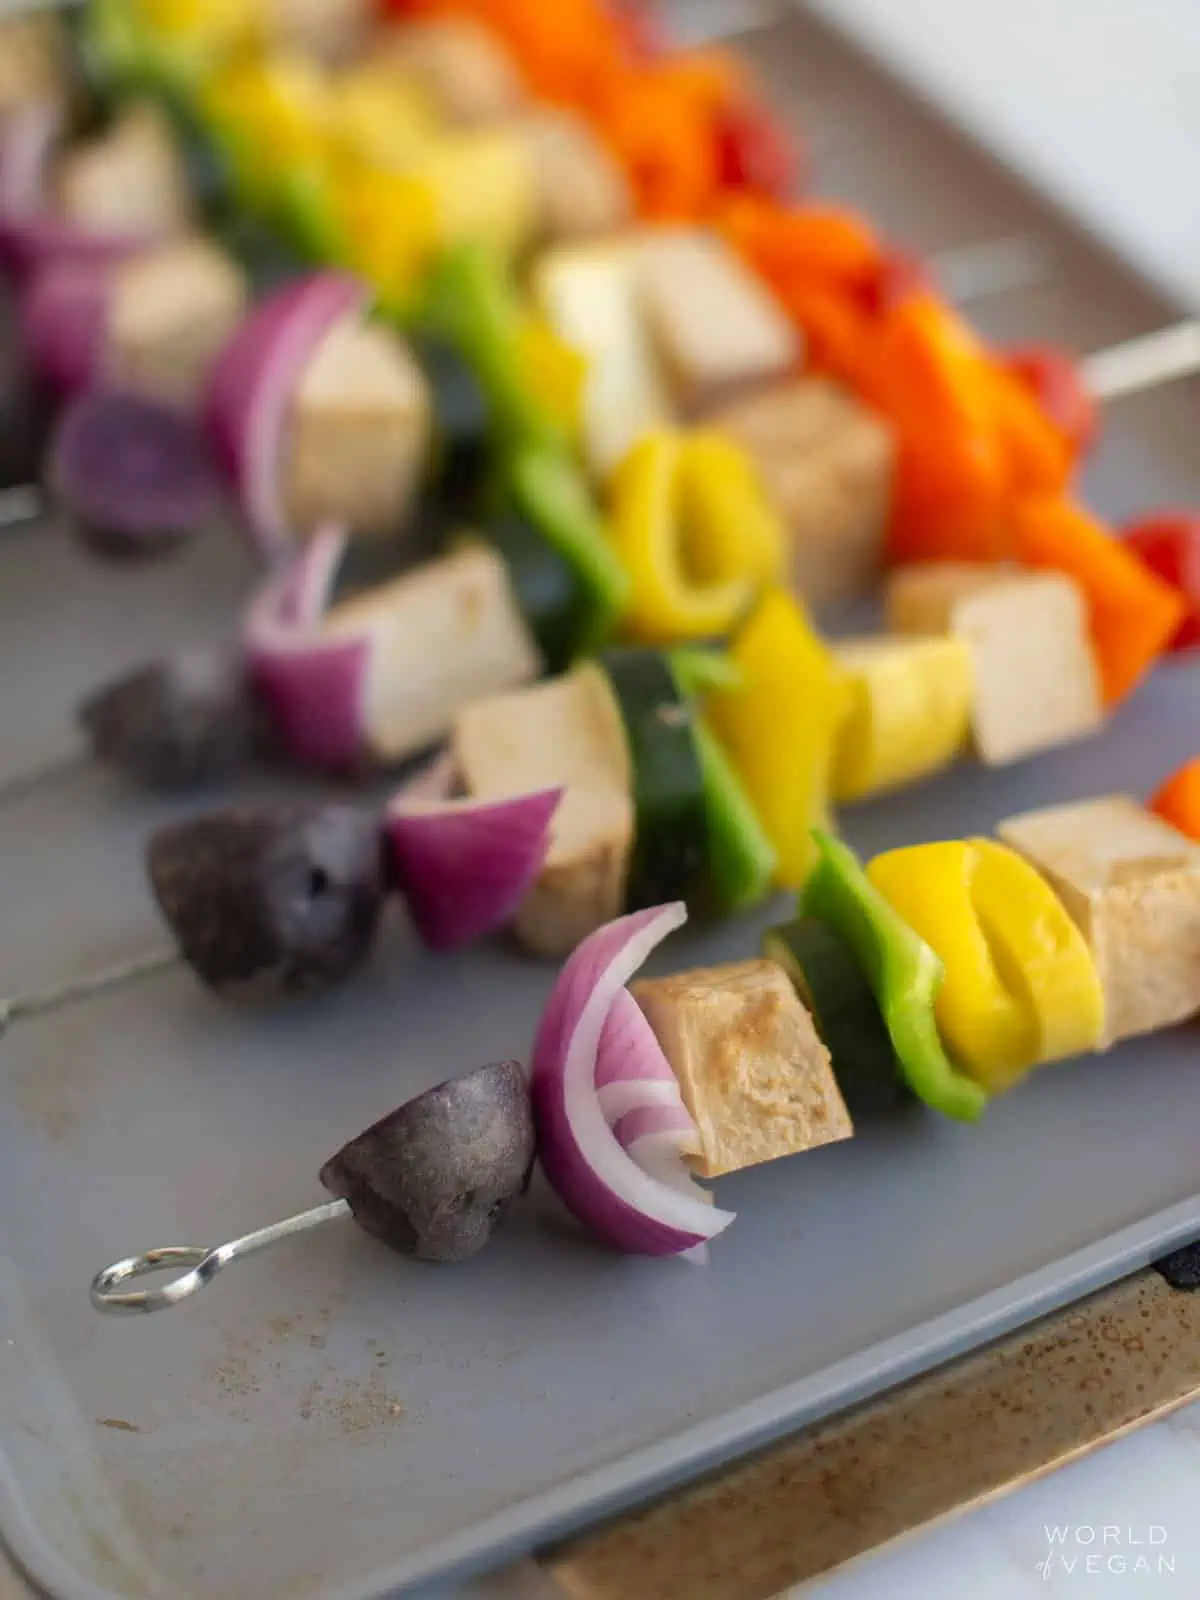 Assembled tofu kebabs on a cooking tray.